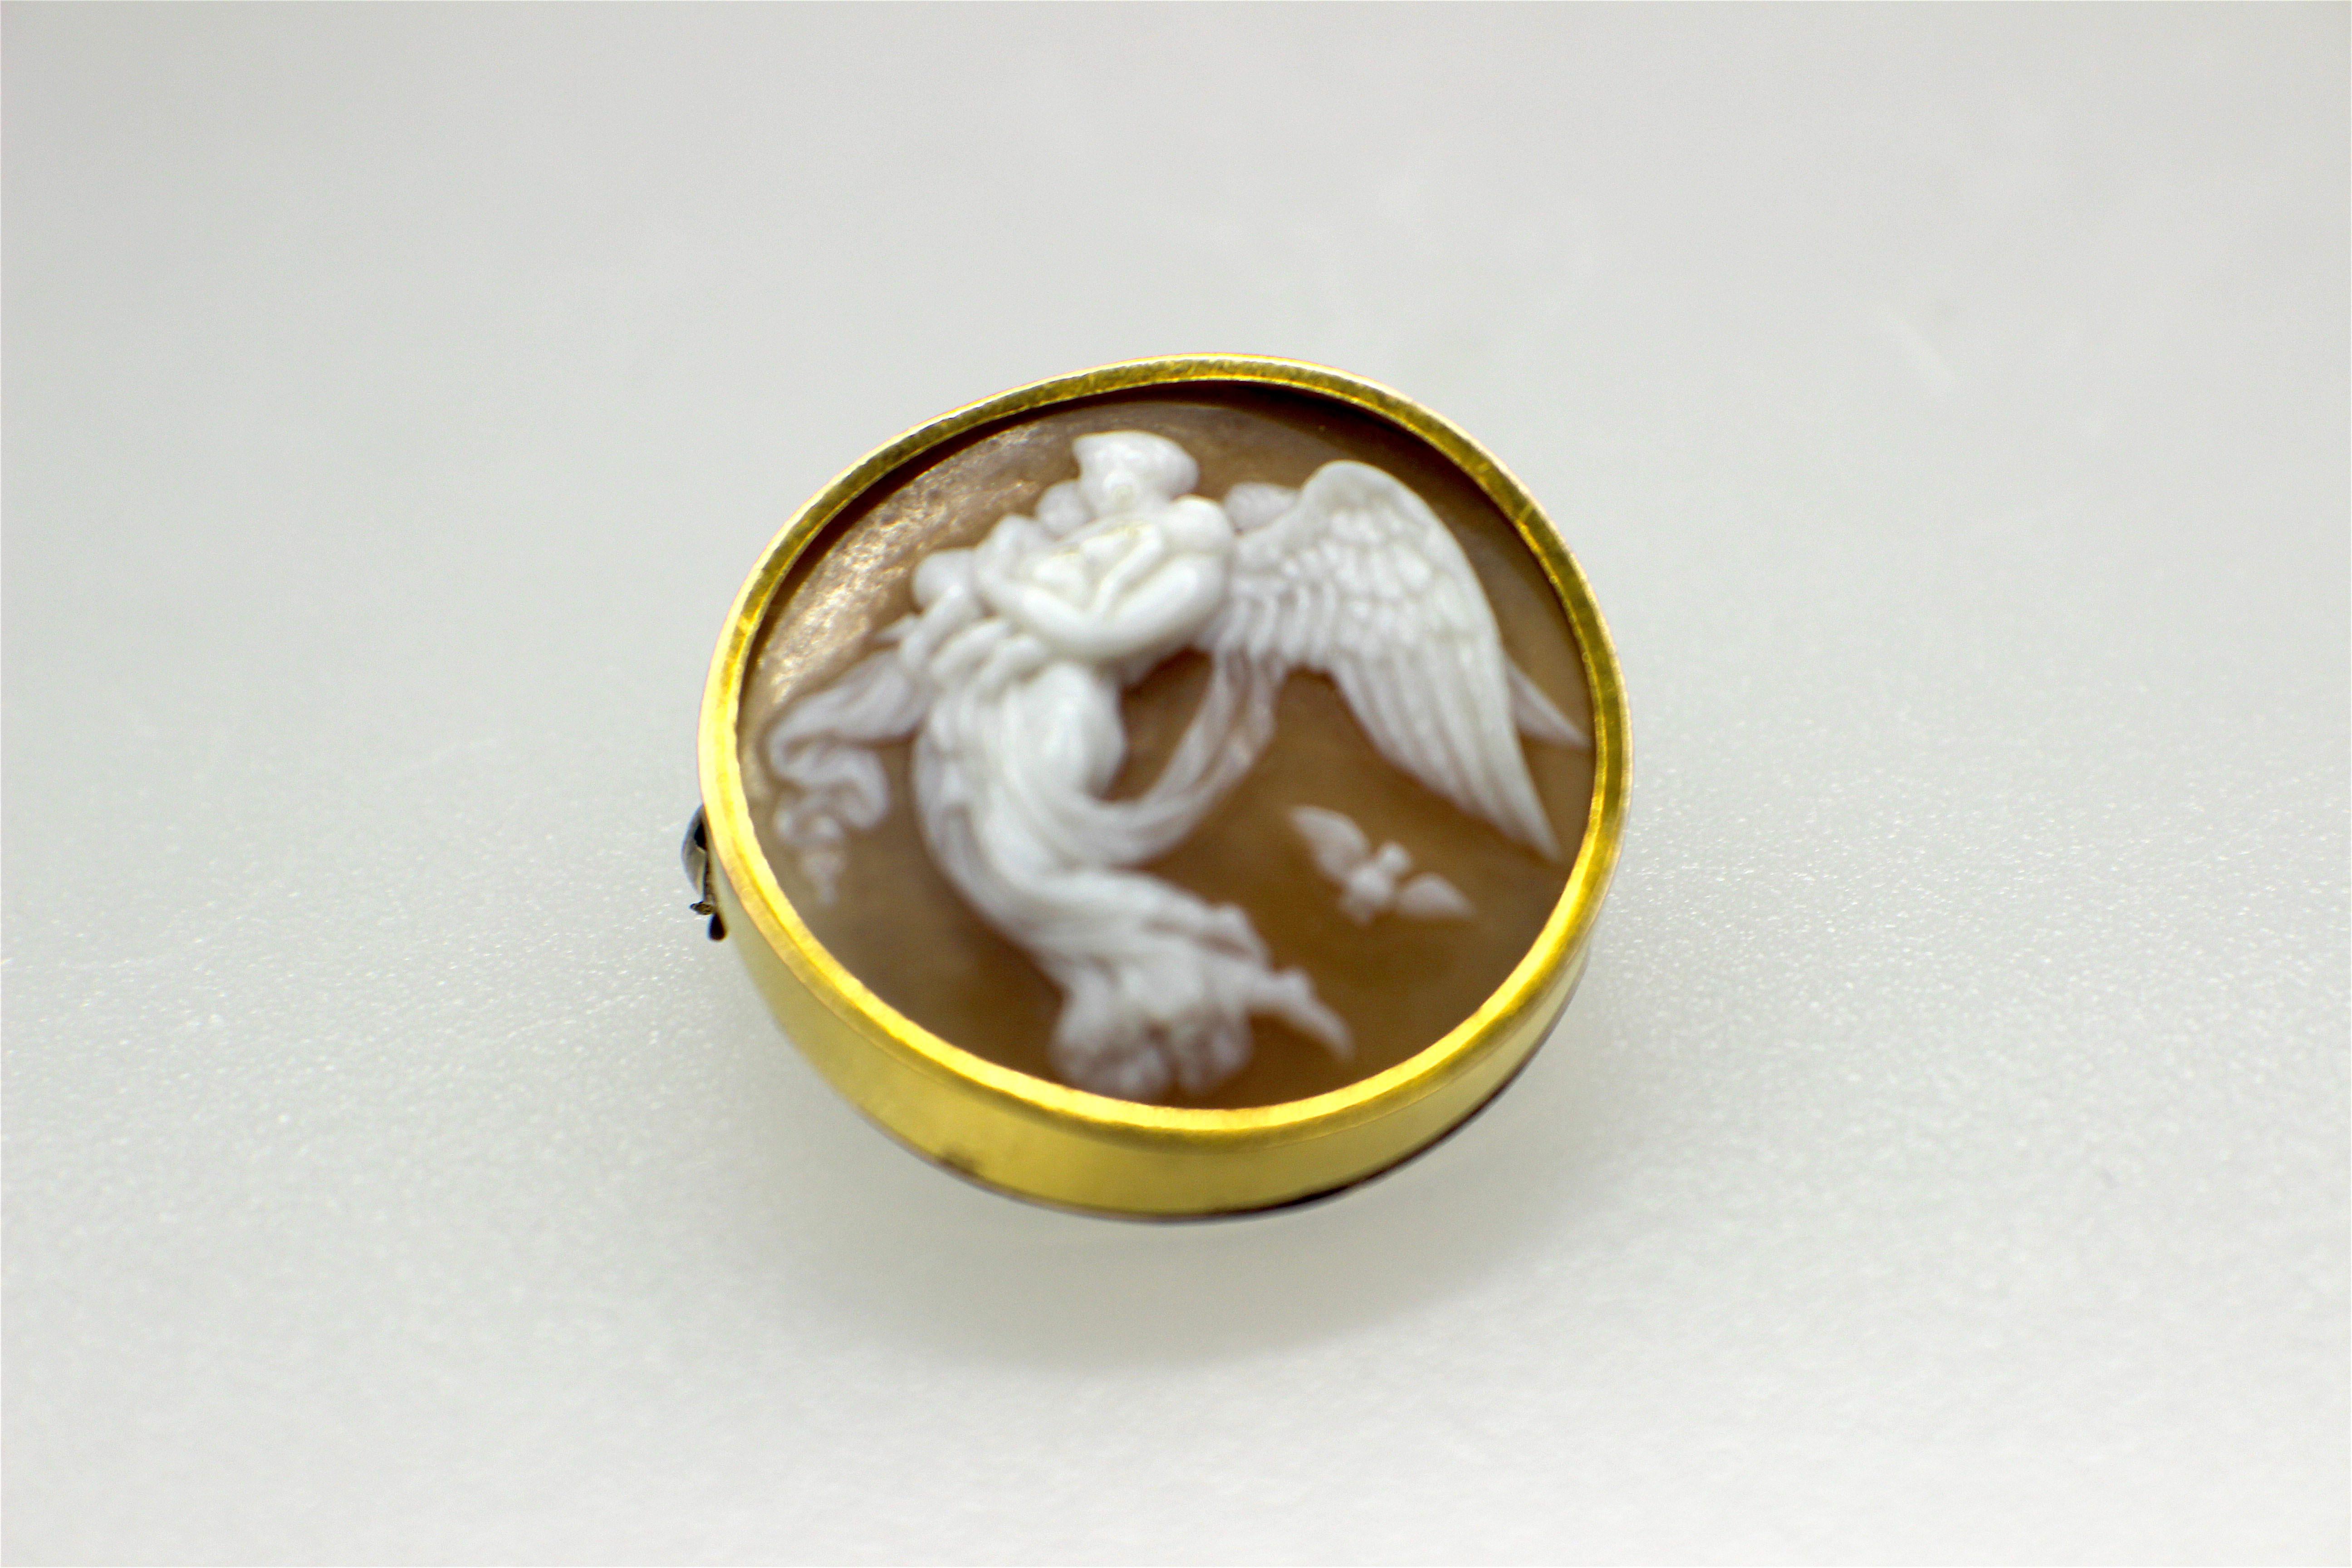 GEMOLITHOS Antique Shell Cameo Gold Brooch-locket, circa 1870s, 5,4gr. and circa 2,5cm. 
depicting `The night of Thorvaldsen`. The reliefs Night and Day that hang opposite each other at the Museum of Thorvaldsen, are Thorvaldsen’s most popular